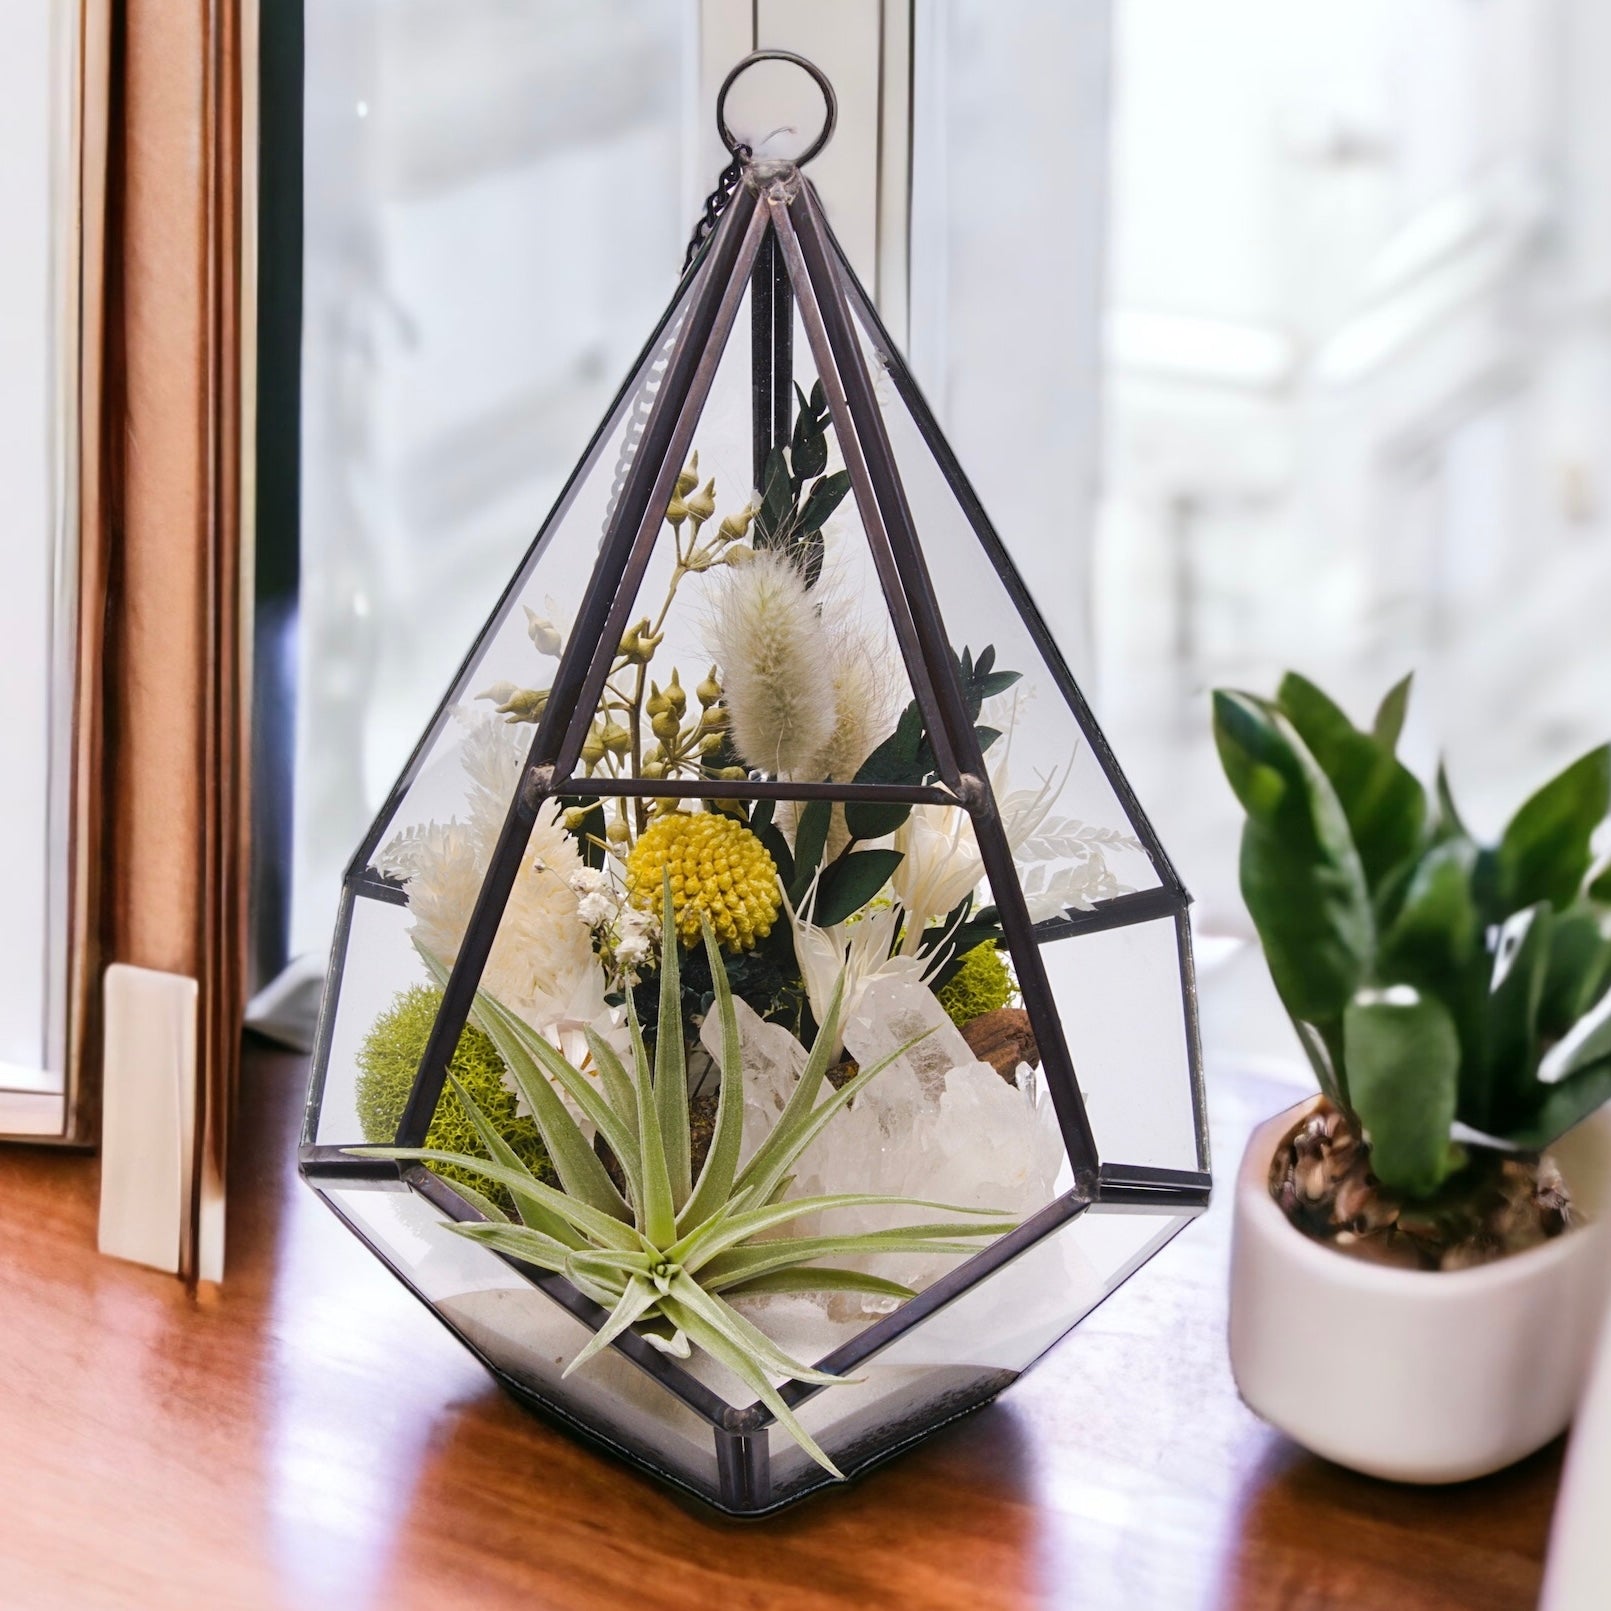 Glass geometric black terrarium with dried flowers, sand, moss, wood and an airplant